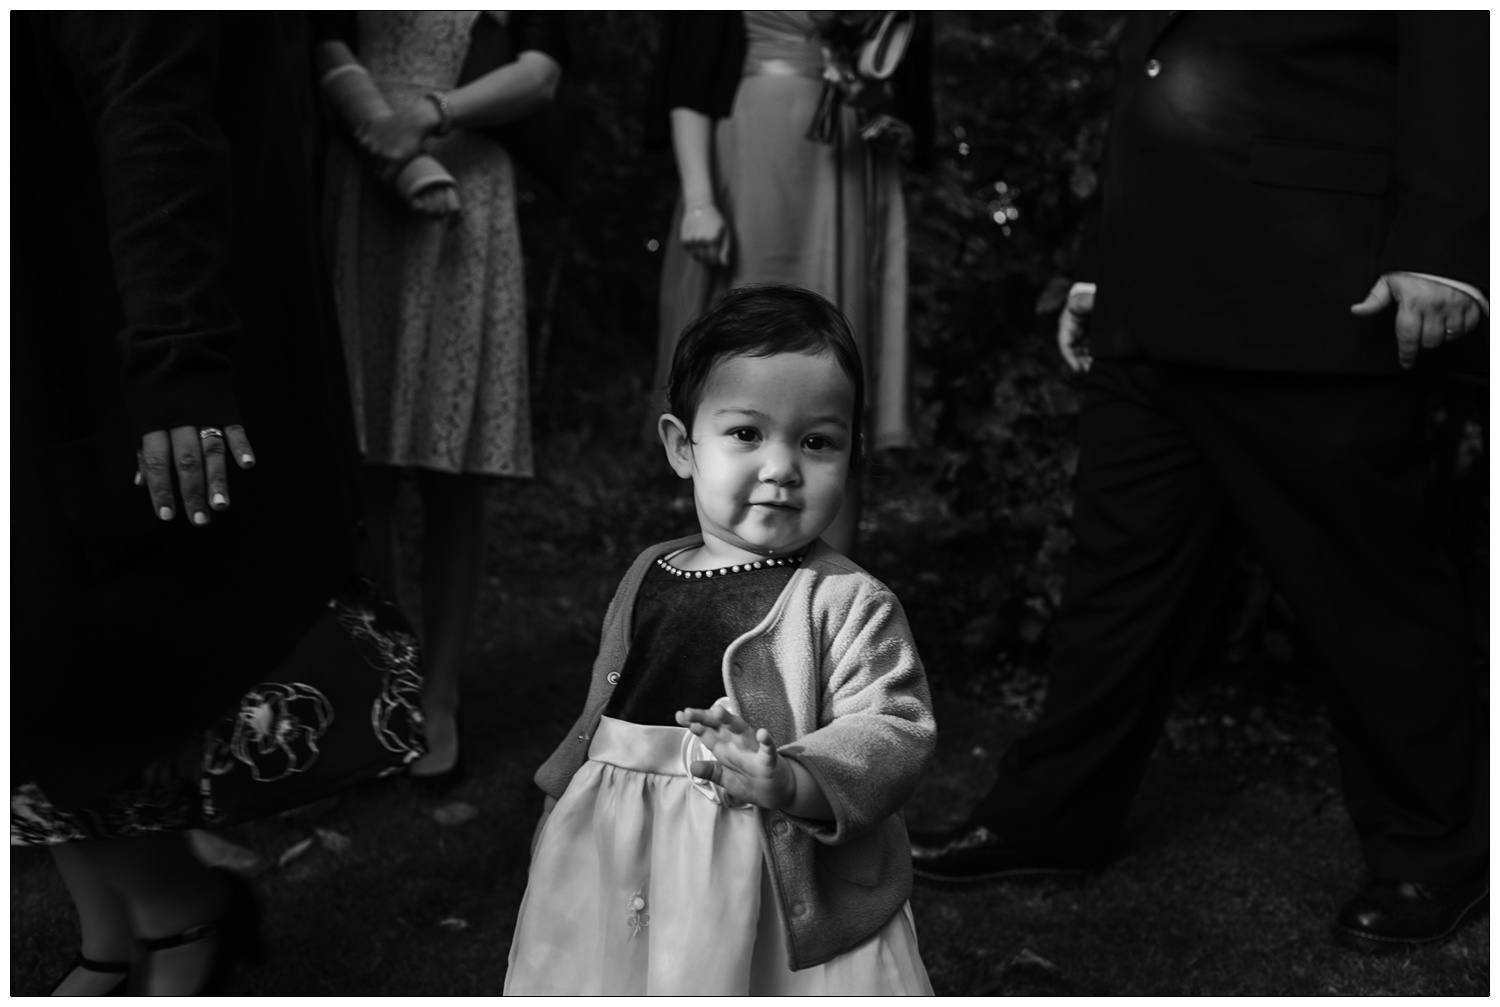 A little girl looks at the camera at a wedding.